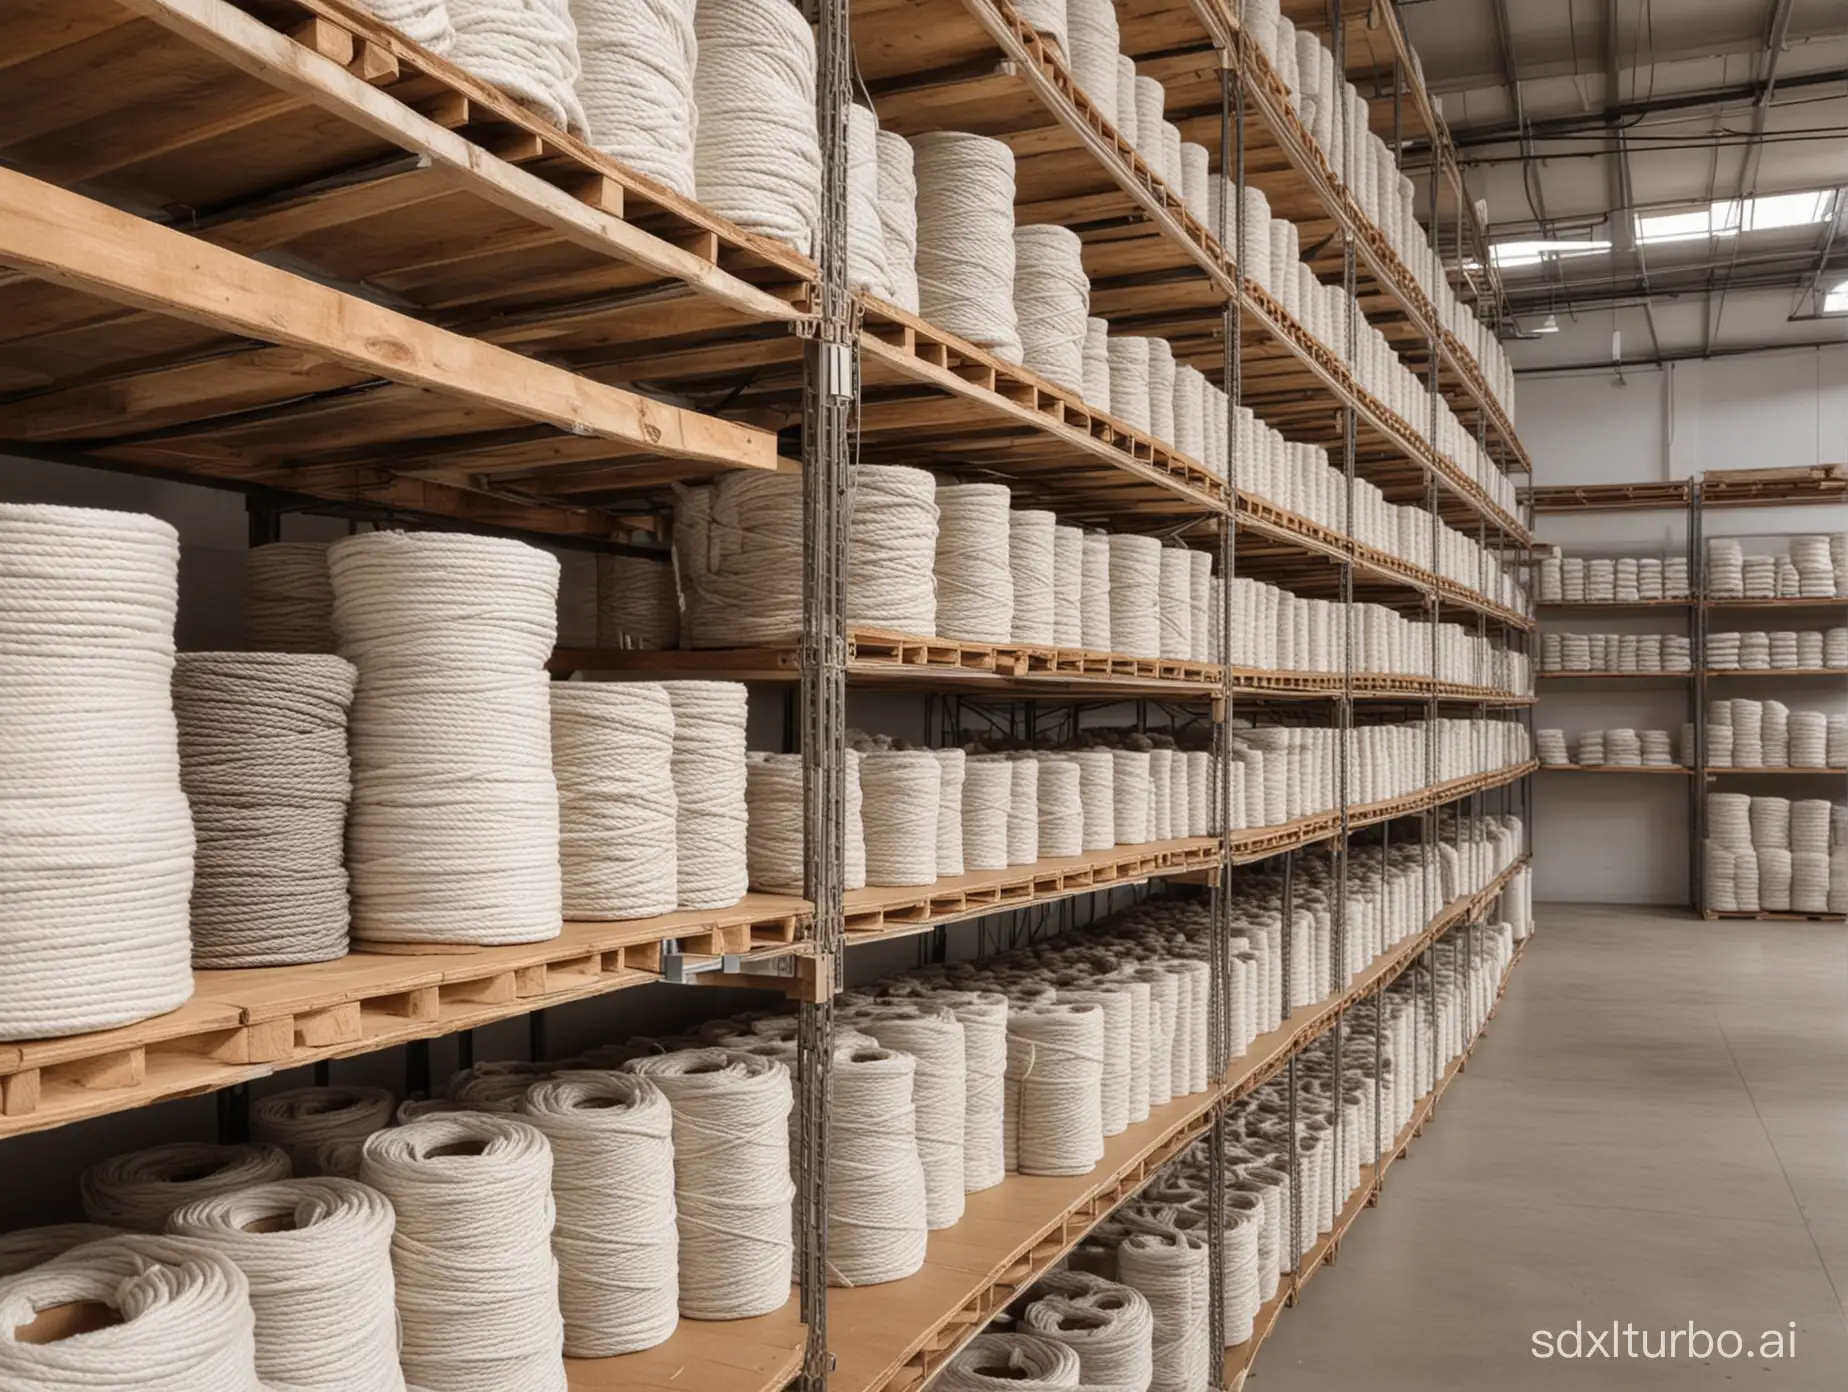 A clean and bright warehouse, the cotton ropes are neatly placed on the shelves, eco-friendly, warm